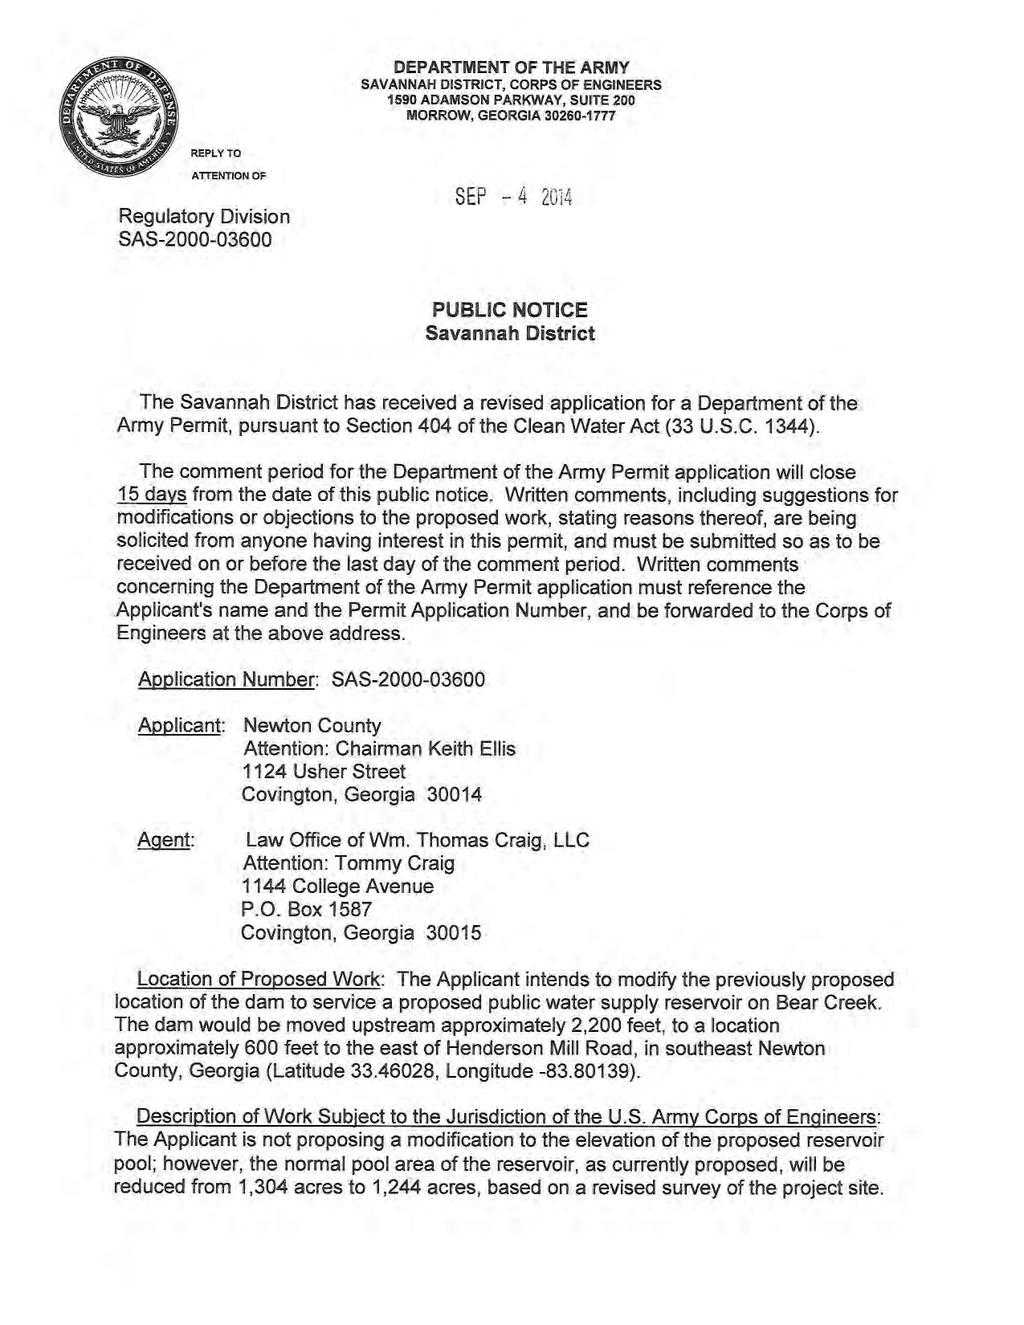 DEPARTMENT OF THE ARMY SAVANNAH DISTRICT, CORPS OF ENGINEERS 1590 ADAMSON PARKWAY, SUITE 200 MORROW, GEORGIA 30260-1777 REPLY TO ATTENTION OF Regulatory Division SAS-2000-03600 SEP - 4 2014 PUBLIC